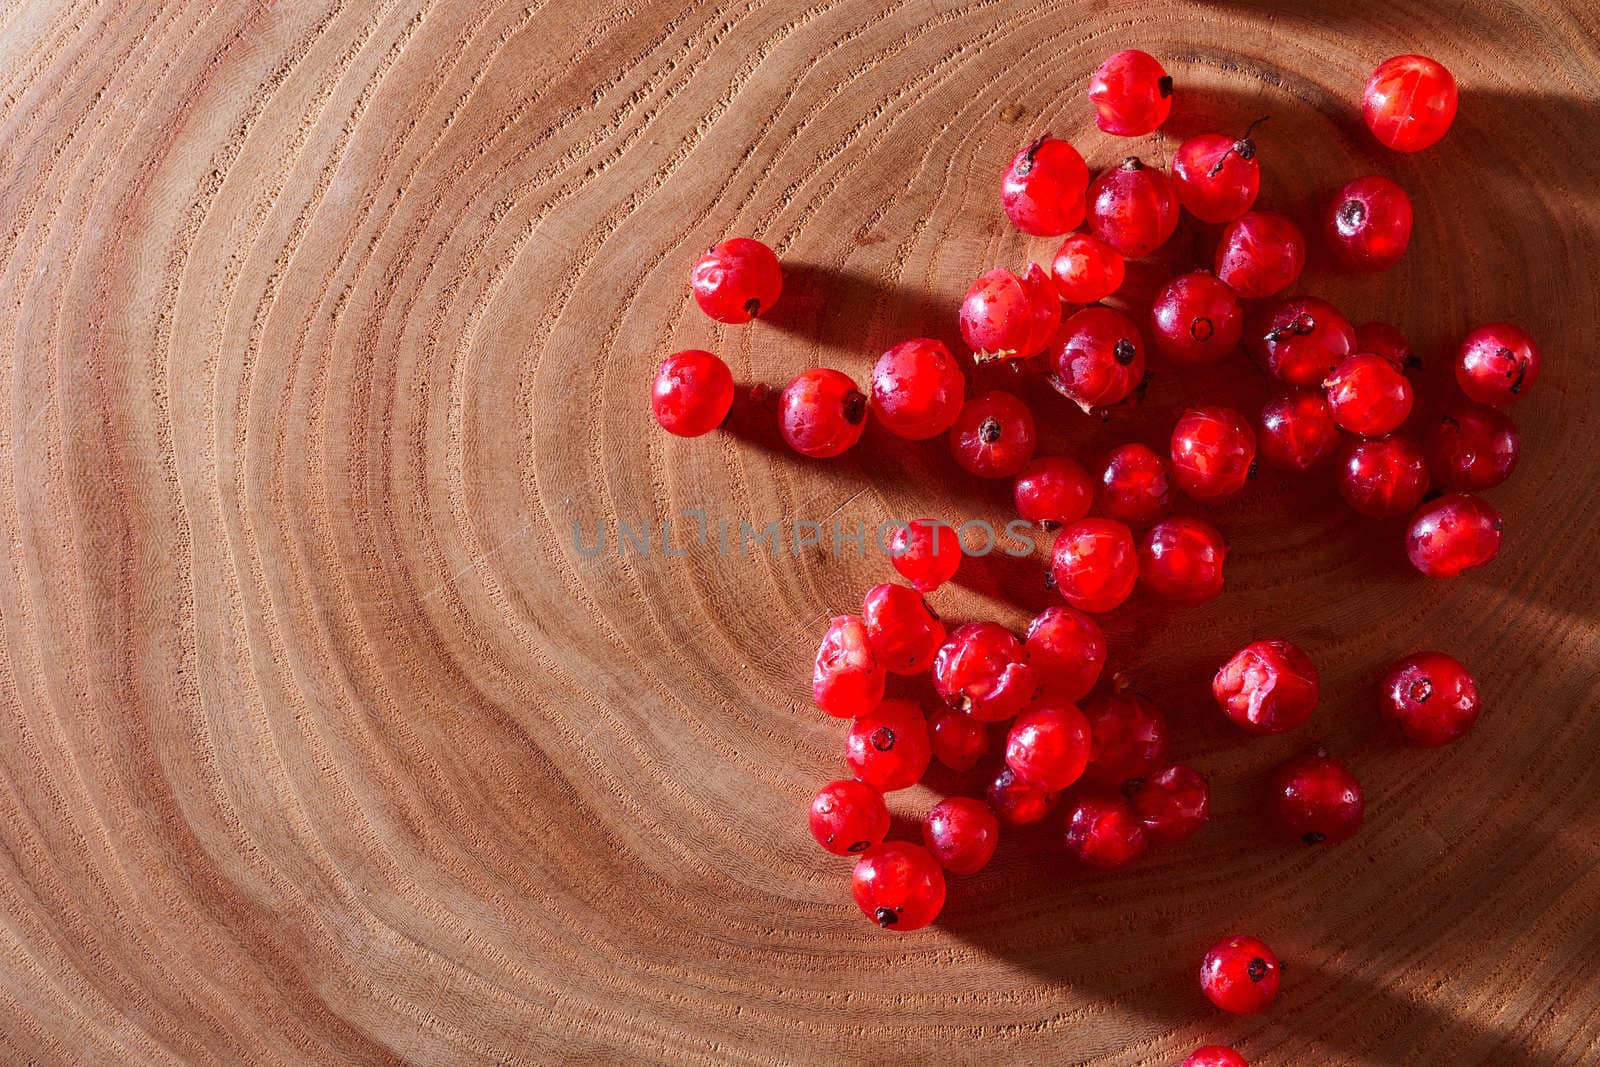  Red currants on wooden background. With copy space. Close-up. Top view. High quality photo